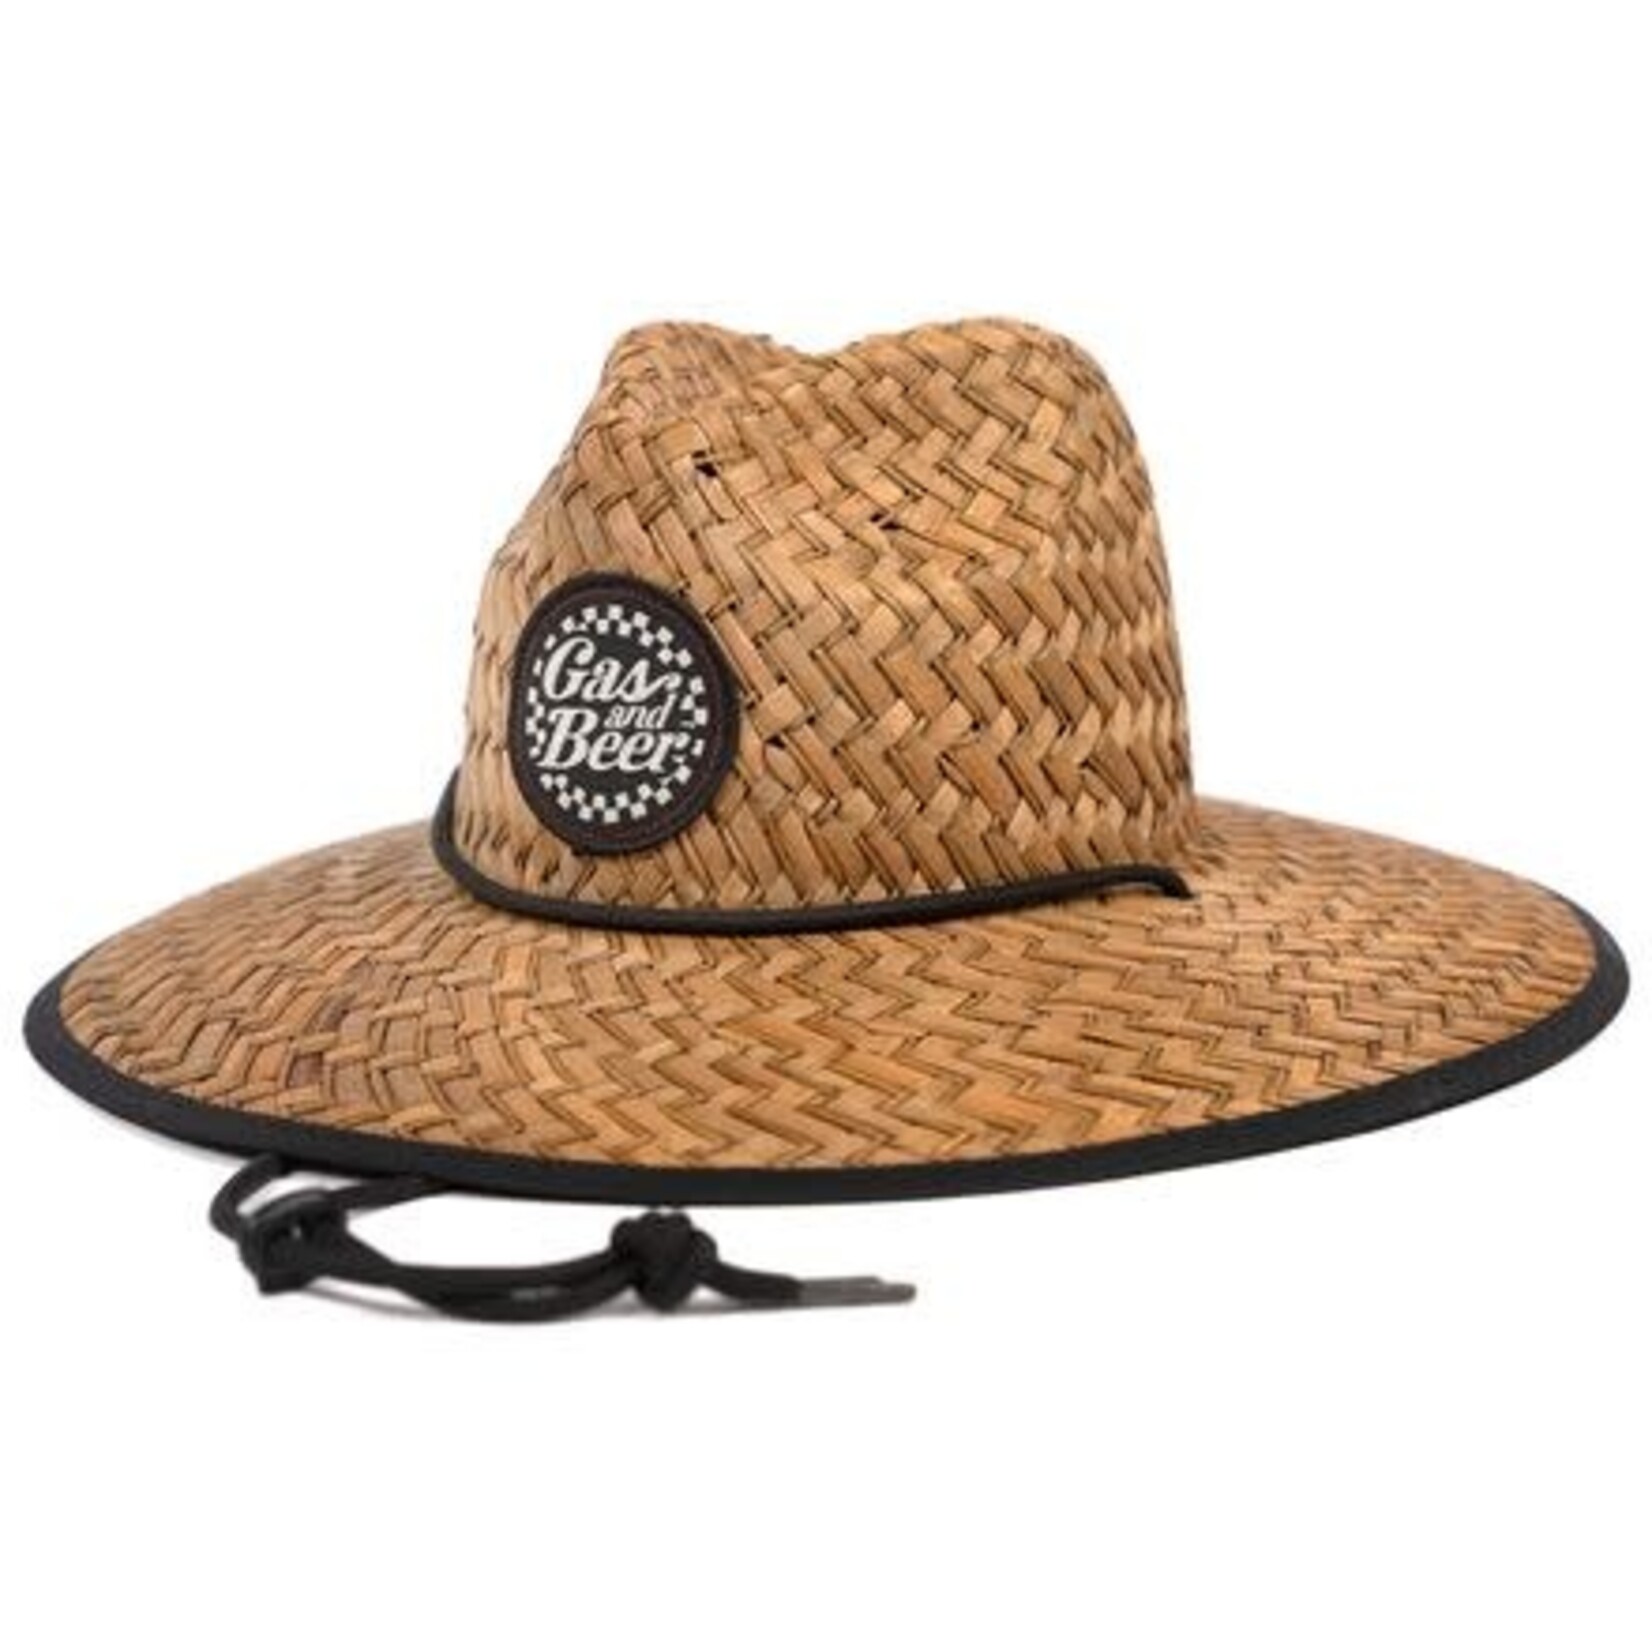 FASTHOUSE FASTHOUSE GAS & BEER STRAW HAT